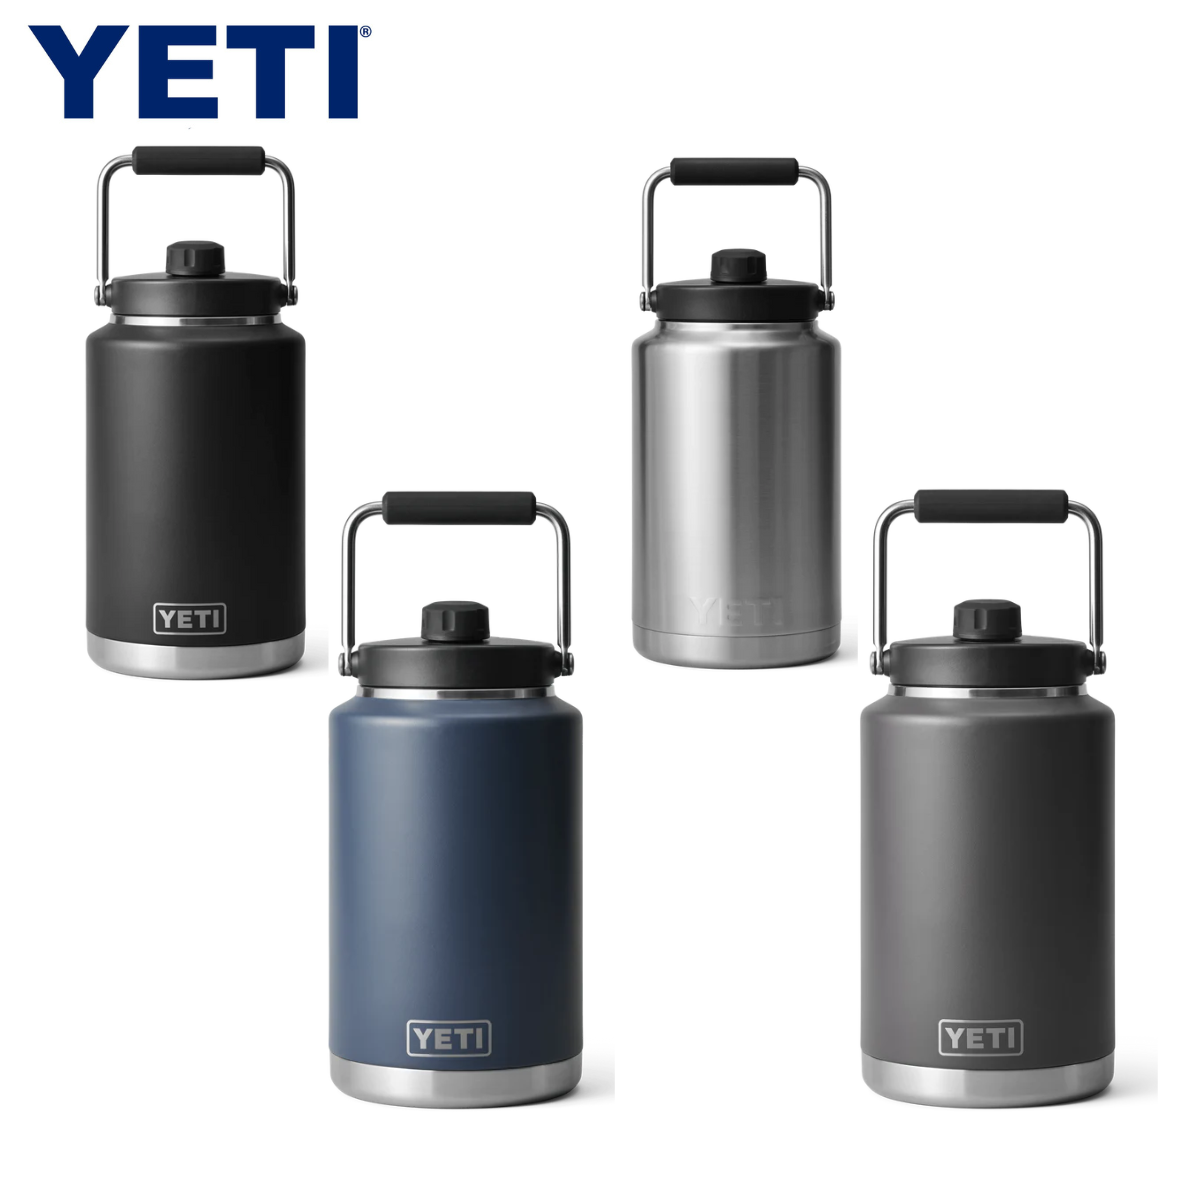 Yeti Rambler 20oz Cocktail Shaker - The Compleat Angler